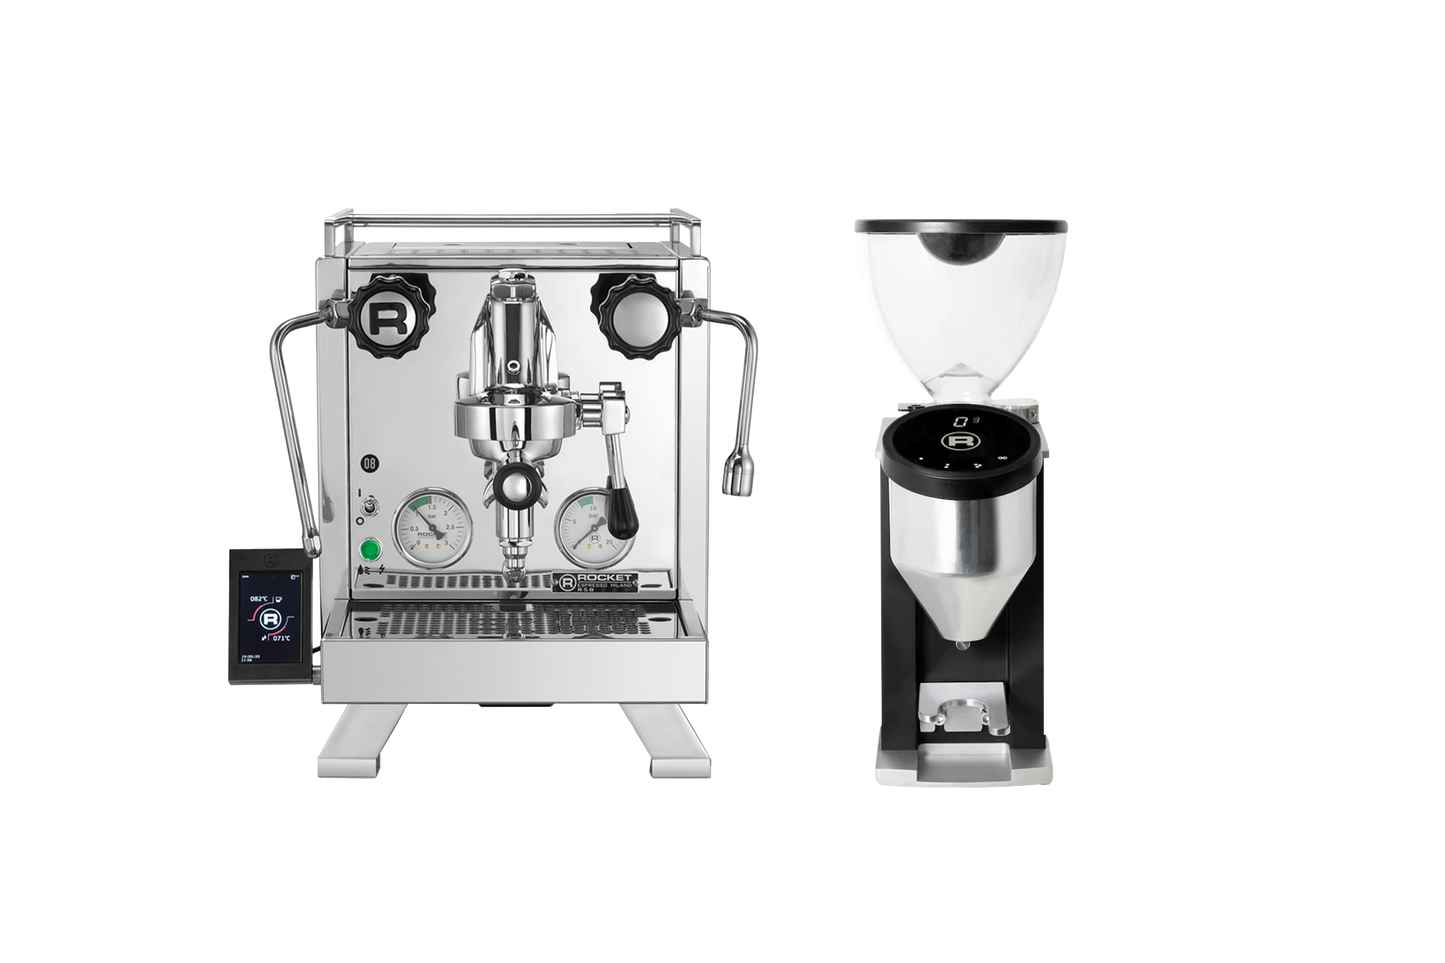 Bringing together Rocket Espresso's beautifully conceived R58 Cinquantotto espresso machine & their Faustino grinder. Hand-built in Milan, this home espresso set-up combines exceptional performance & a small counter footprint.